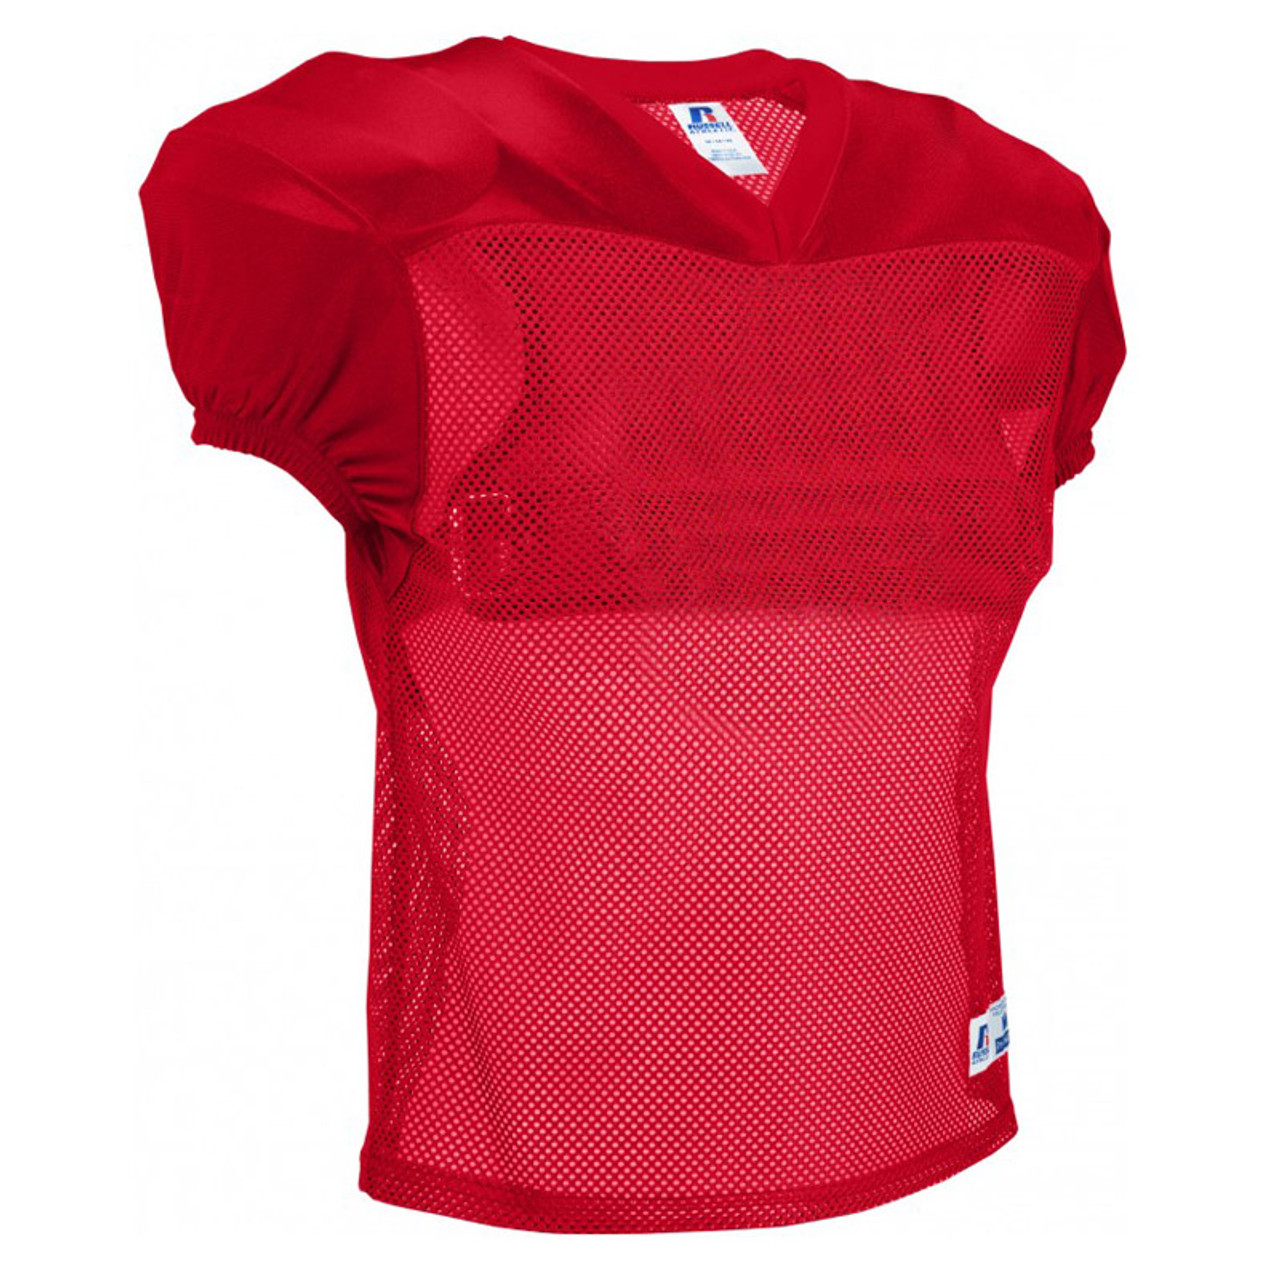 Russell Practice Football Jersey - Red -3XL